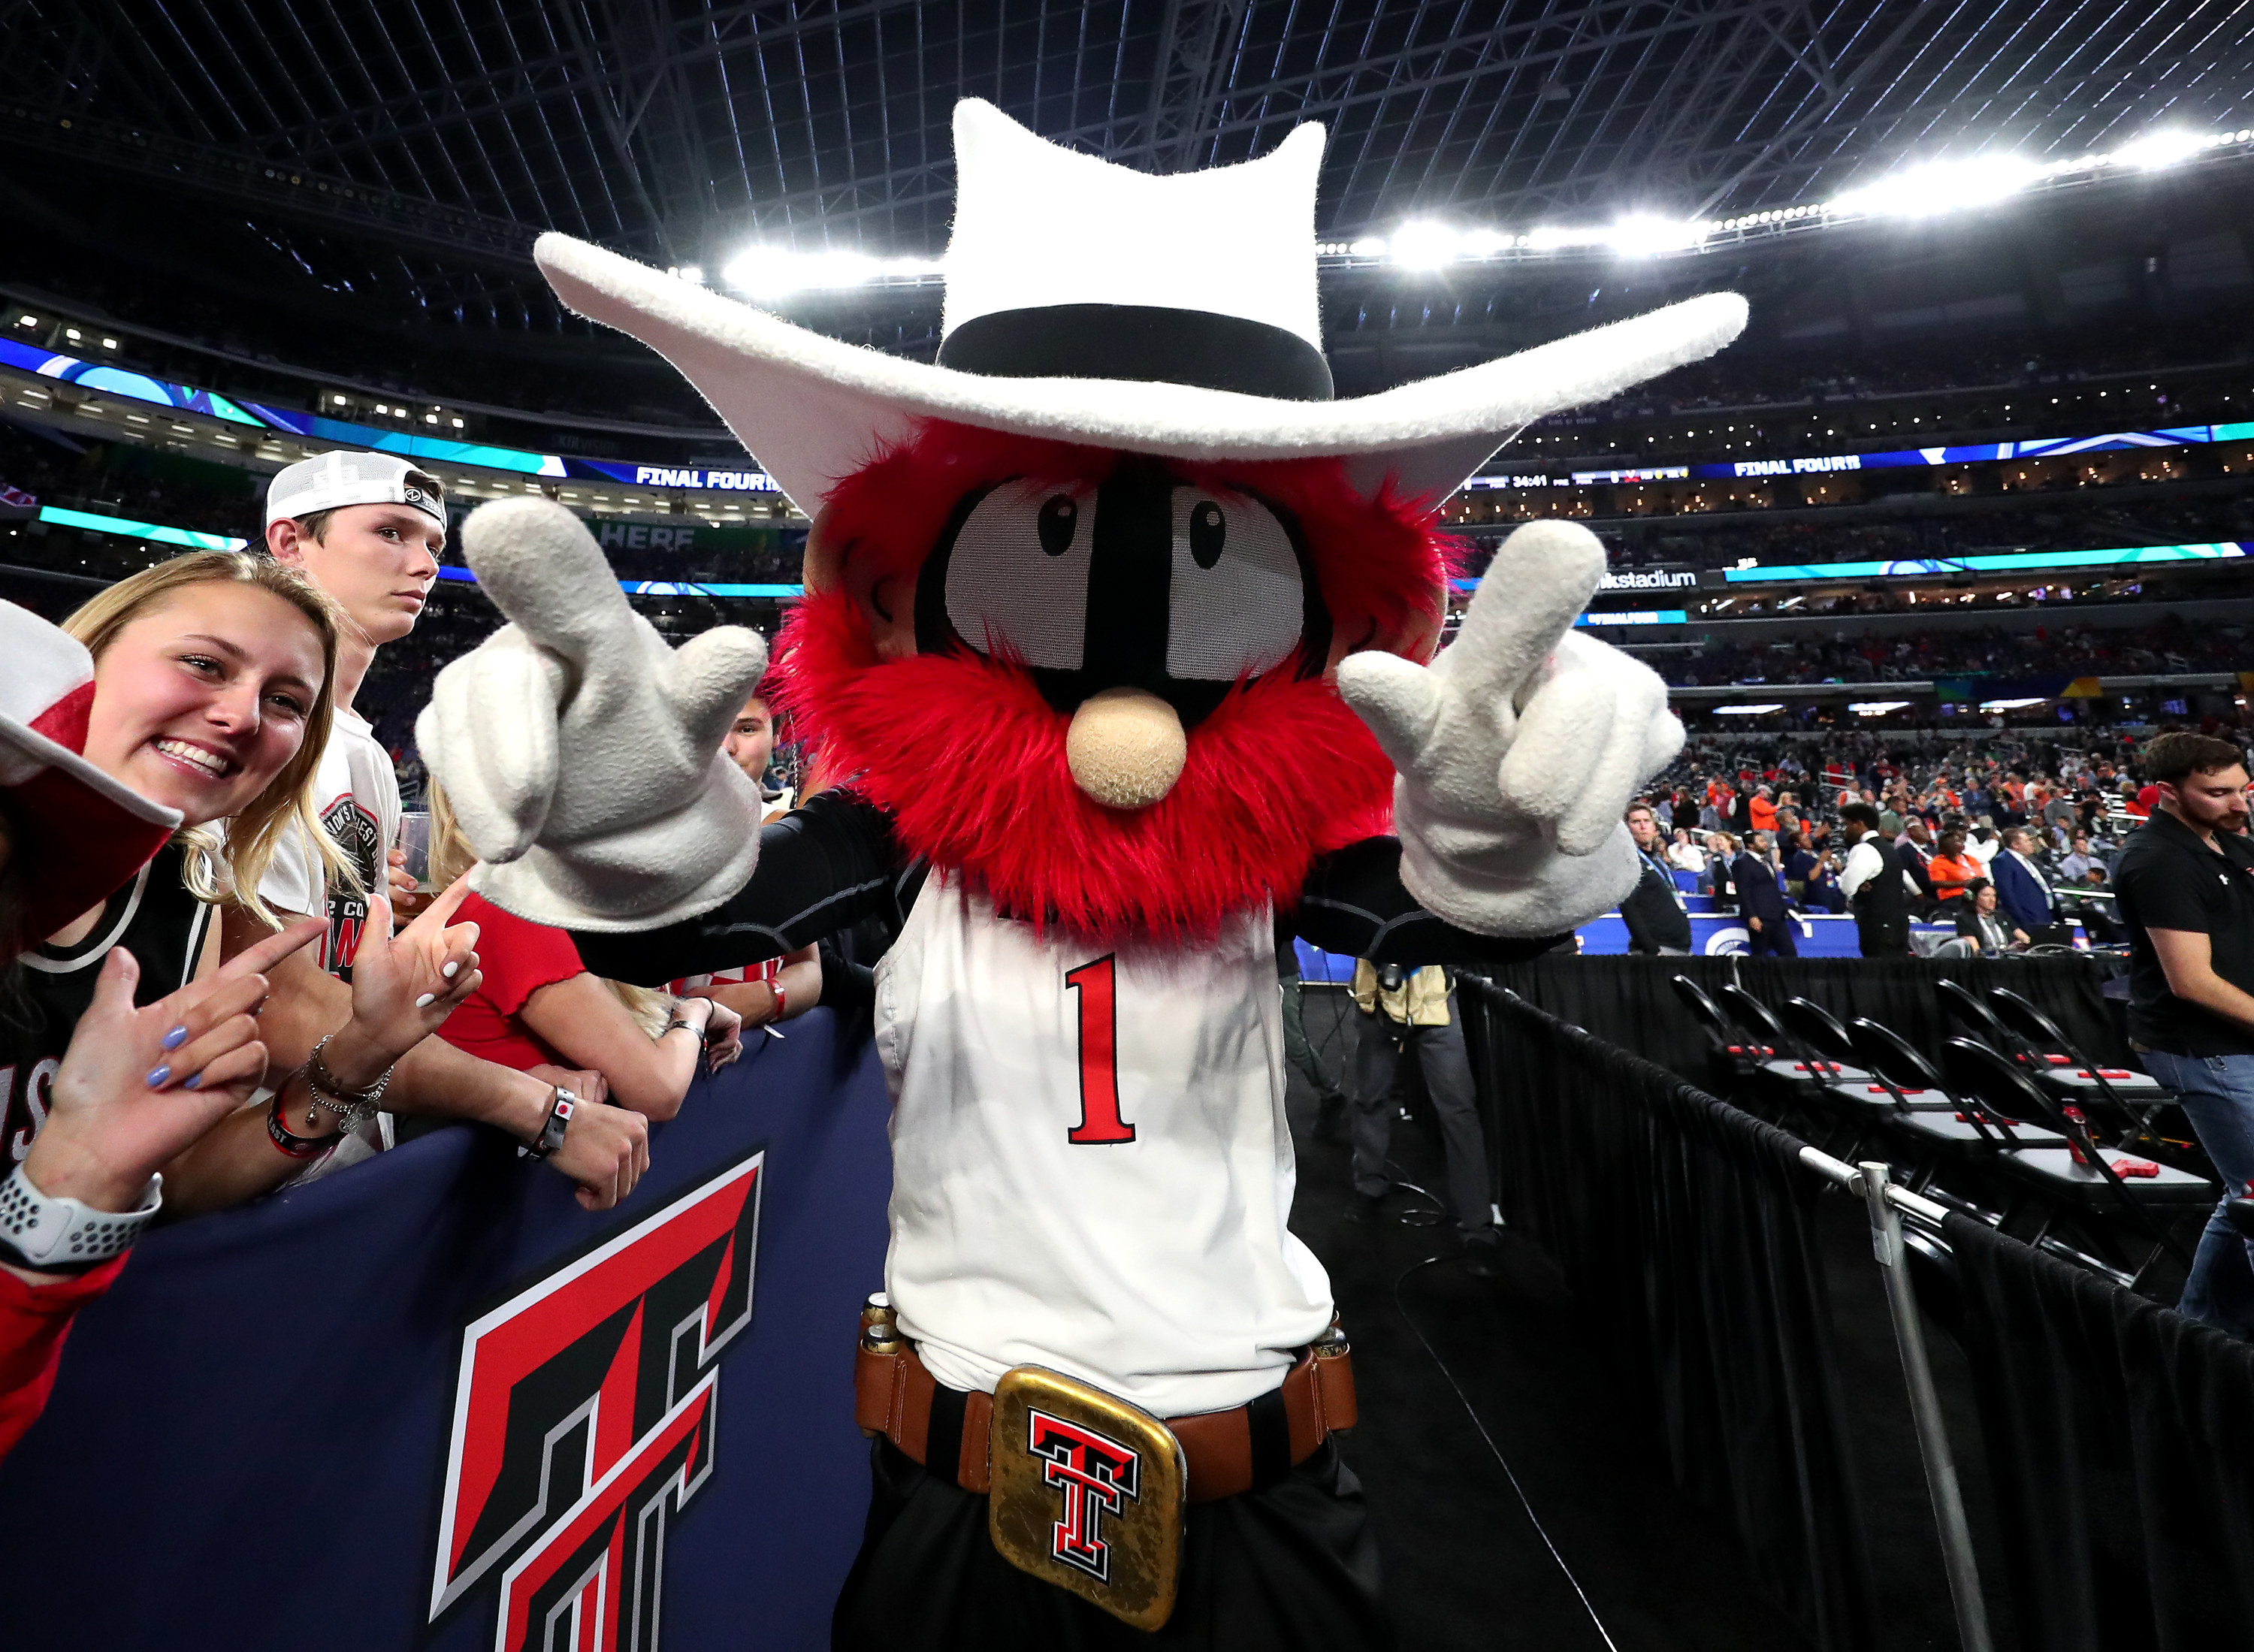 Cowboy hat–wearing mascot with a big red mustache.